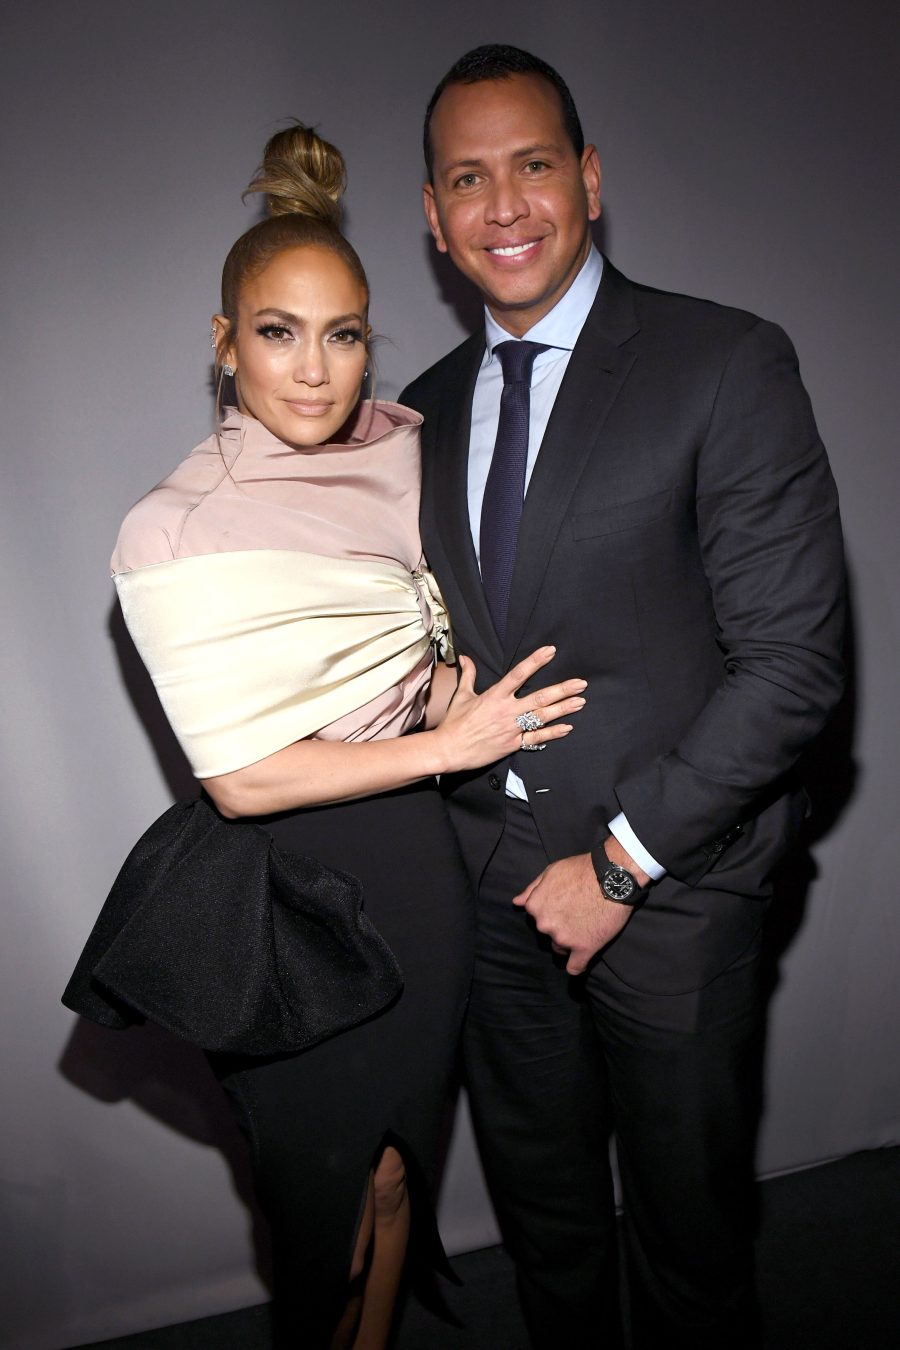 Jennifer Lopez's Dating History A Timeline of Her Famous Relationships, Exes and Flings